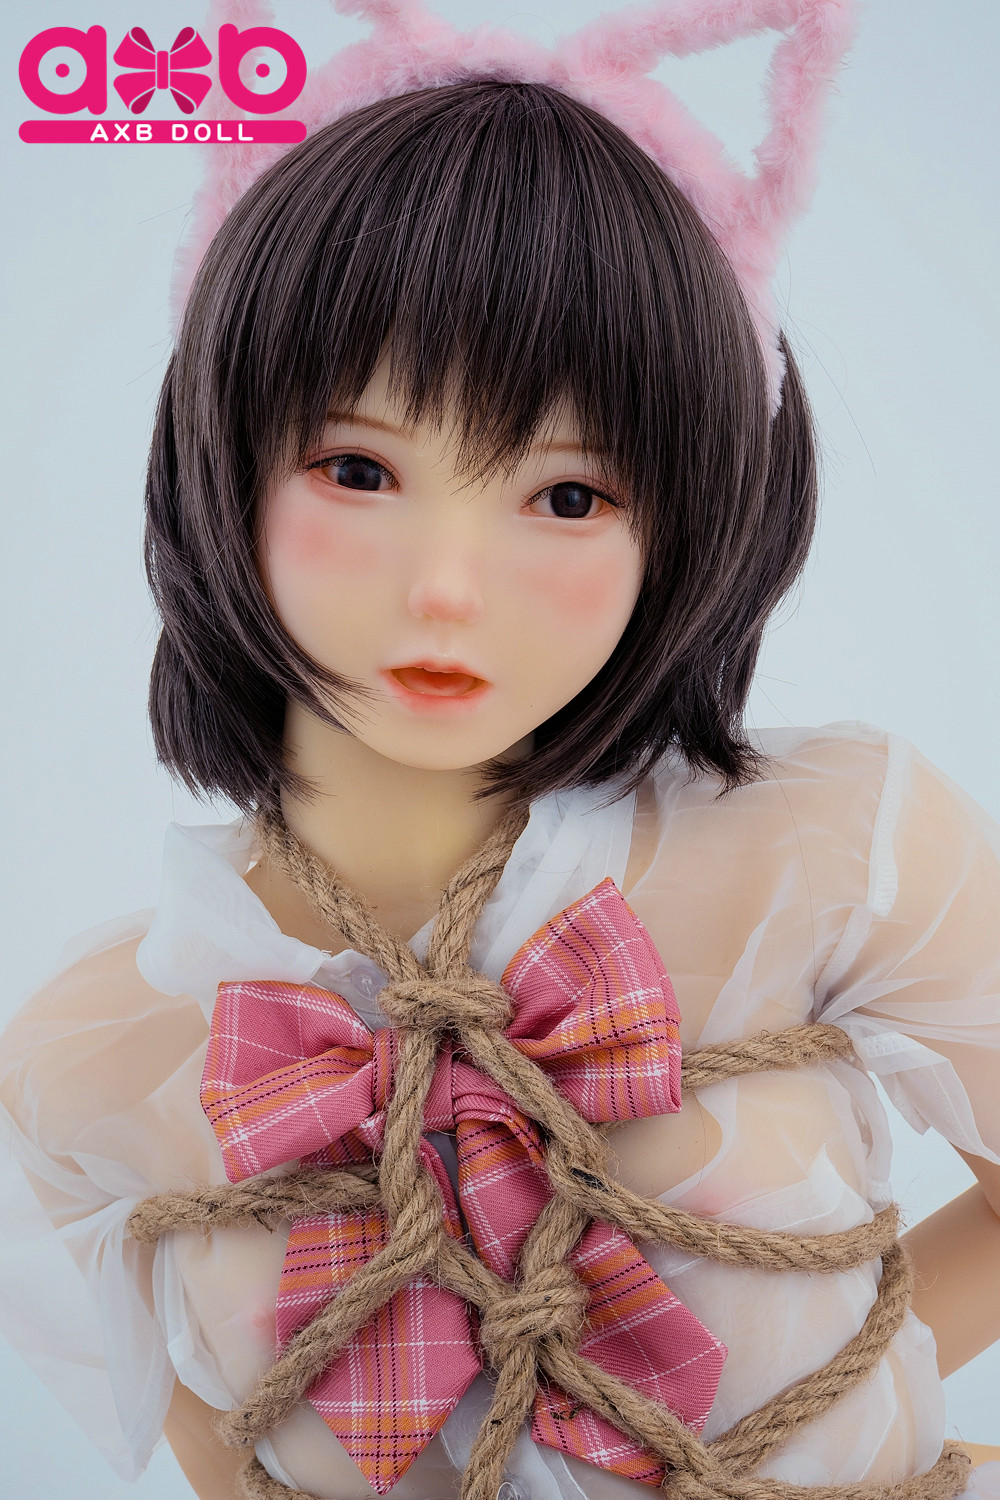 AXBDOLL 120cm A121# TPE Lifesize Love Doll Oral Sex Doll For Men - 画像をクリックして閉じます